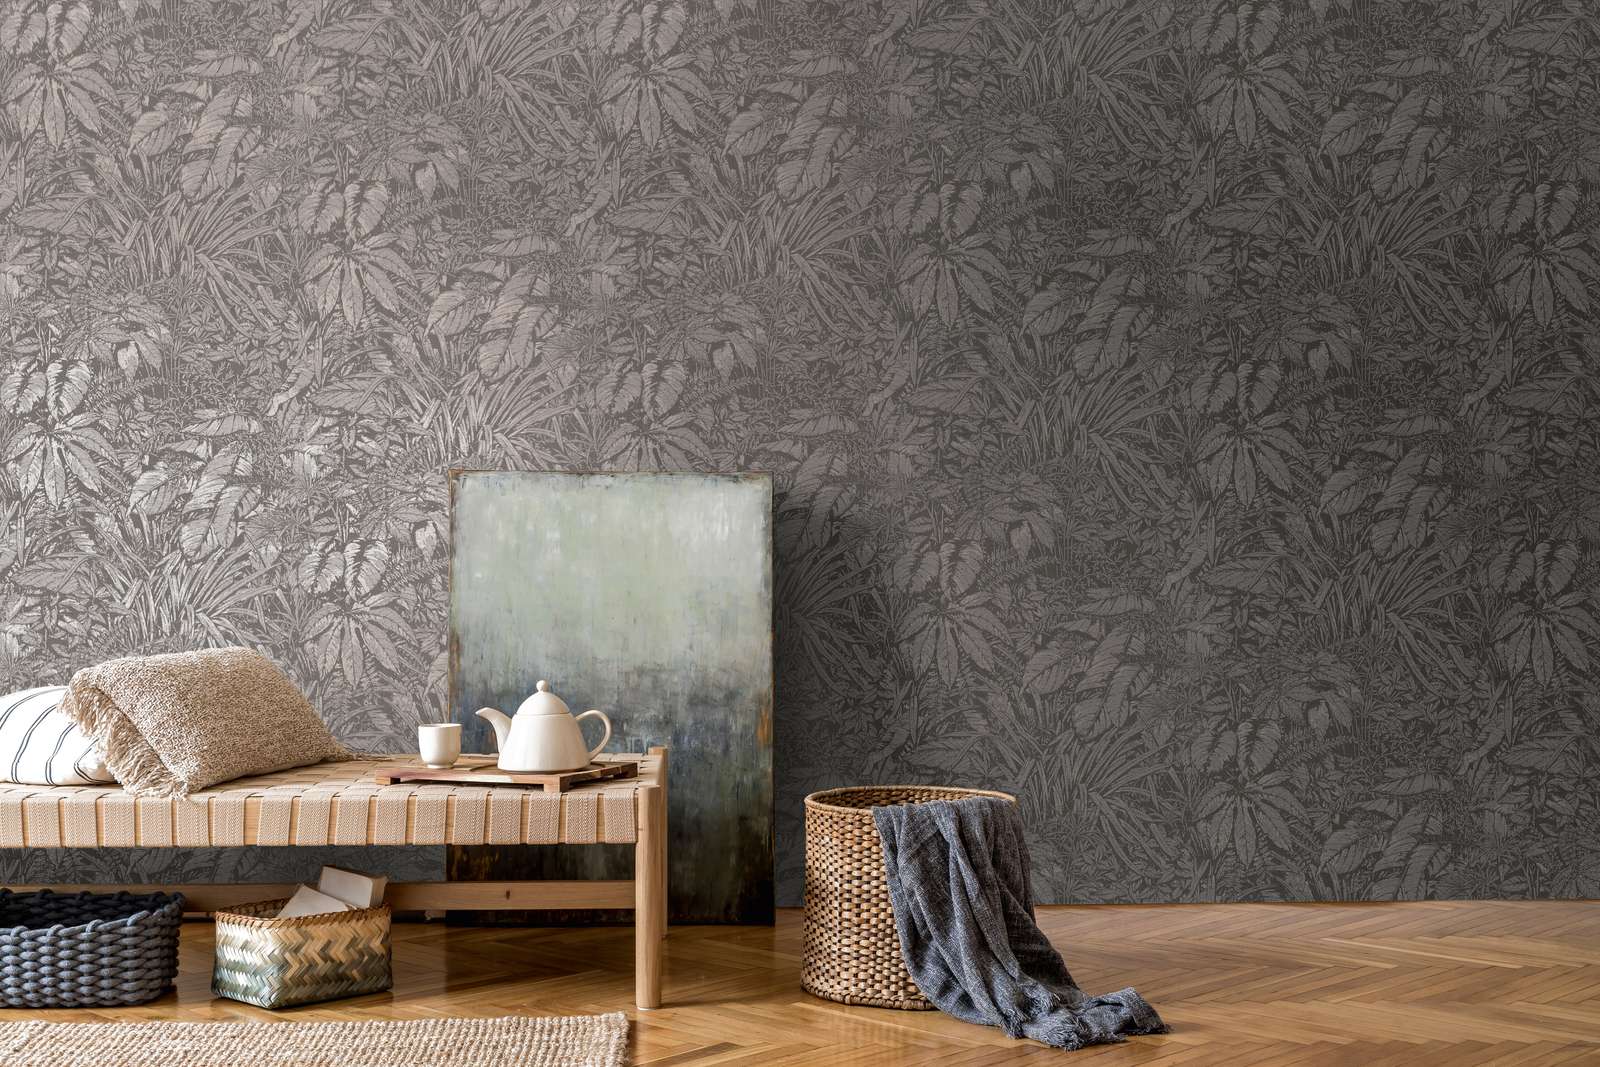             Non-woven wallpaper with floral leaf pattern - grey, black, silver
        